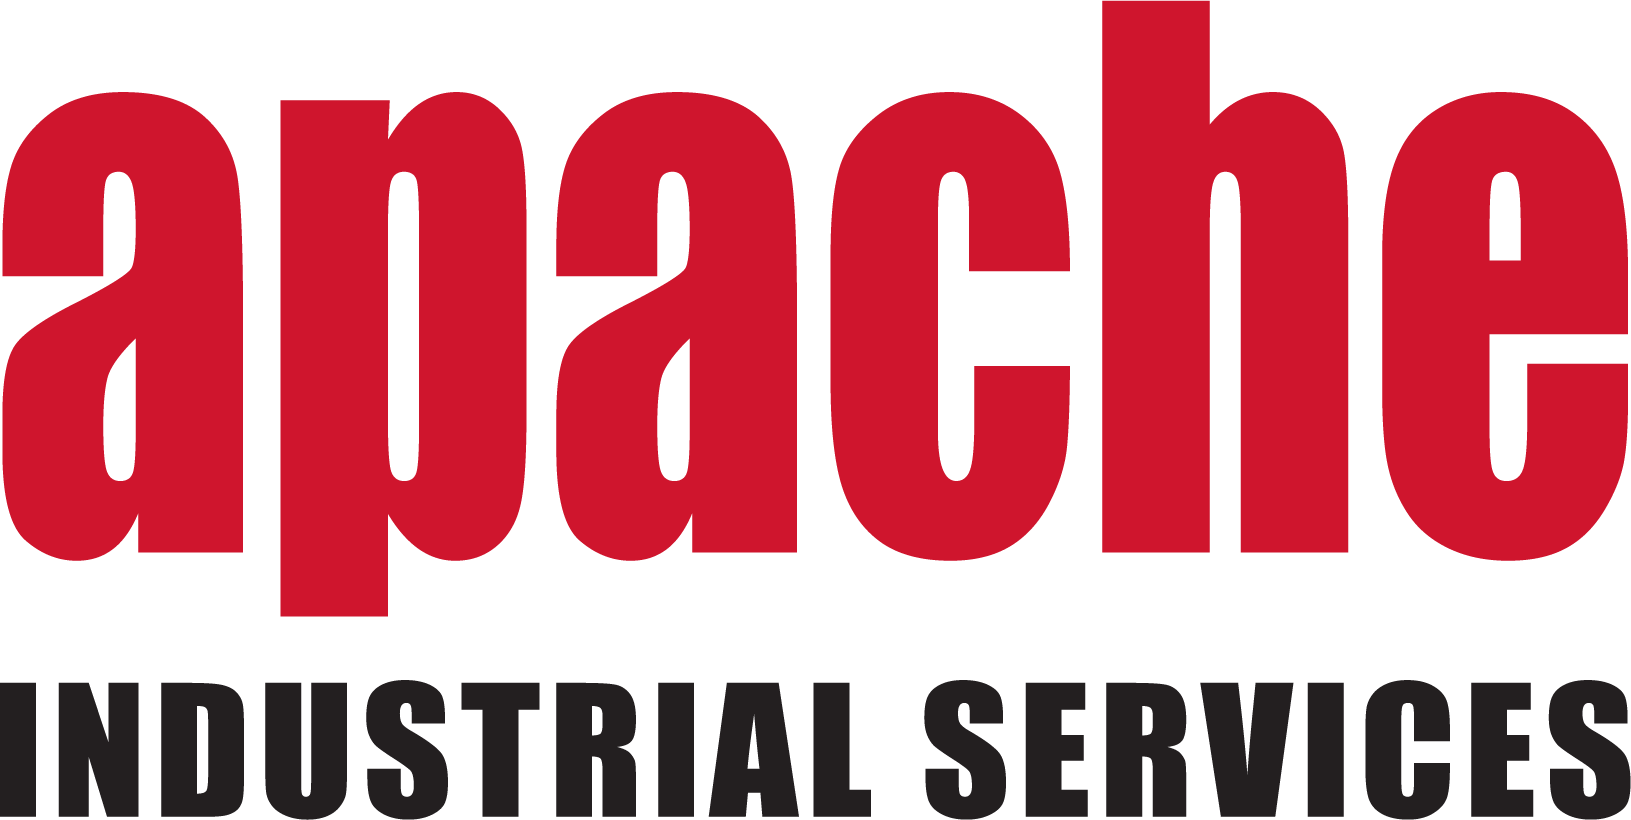 Apache Industrial Services, Inc.